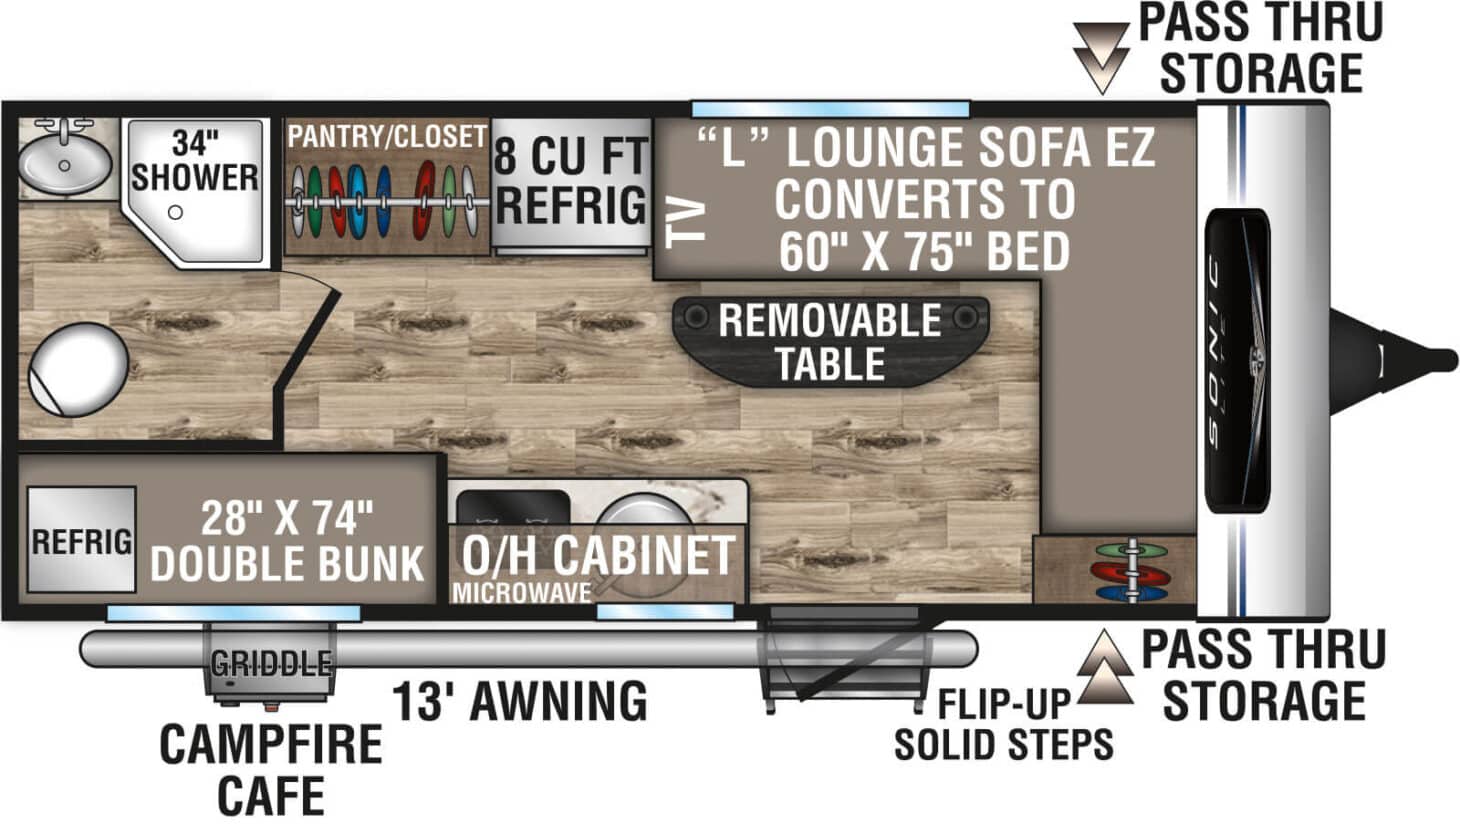 The floorplan for the Venture RV Sonic Lite SL160VBH shows double bunks, a convertible sofa bed, a full kitchen and bath, and ample storage space.